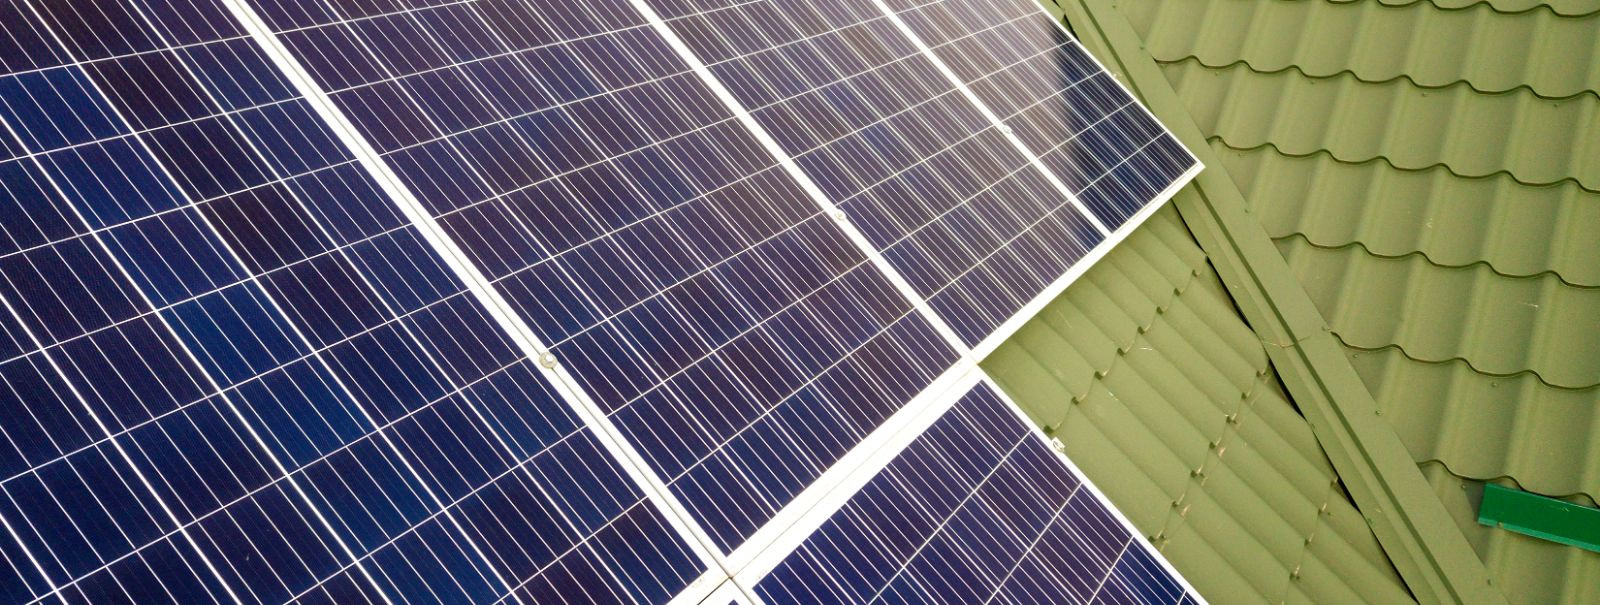 As the world increasingly turns to renewable energy sources, solar panels have become a common sight on rooftops across urban and suburban landscapes. The effic